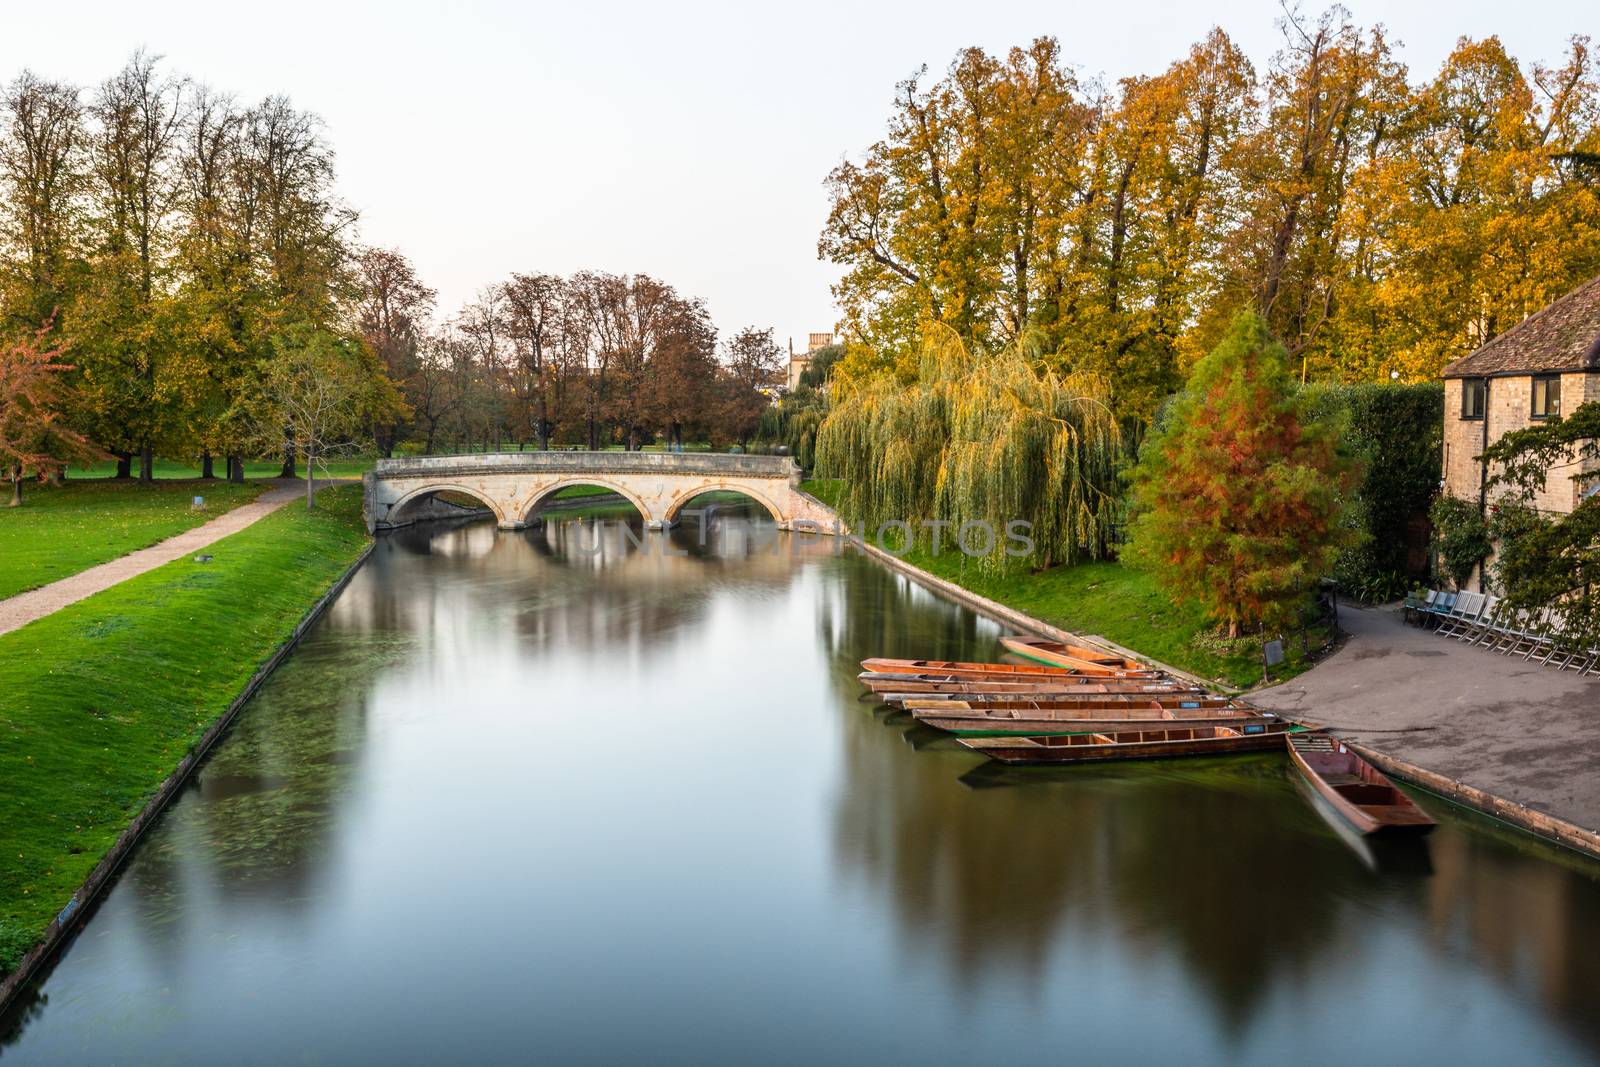 Long exposure shot of river Cam and punts near the historical Colleges Kings, Trinity and St john, Cambridge, UK